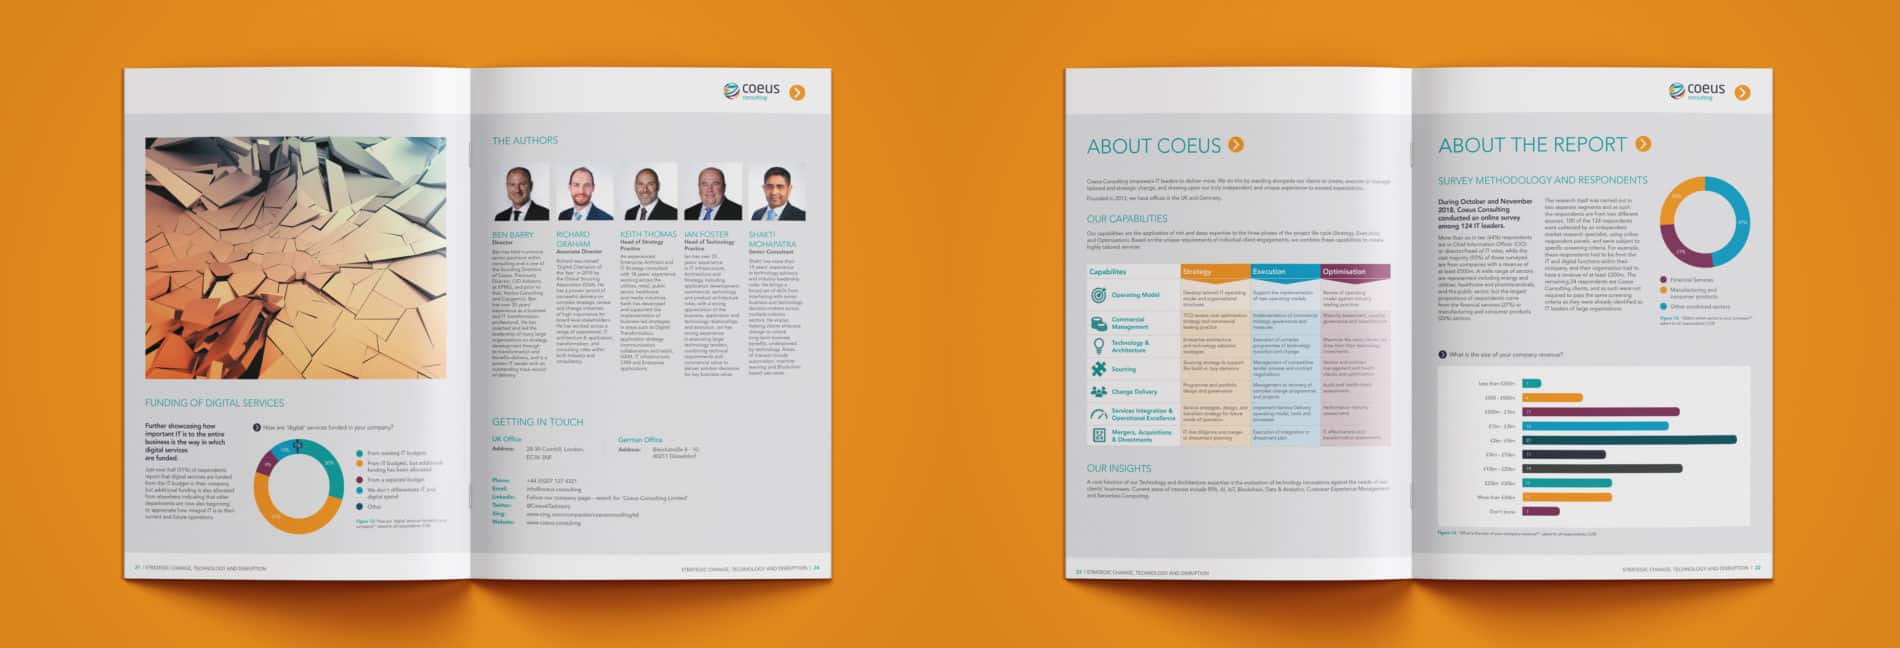 Examples of Annual Report Designs